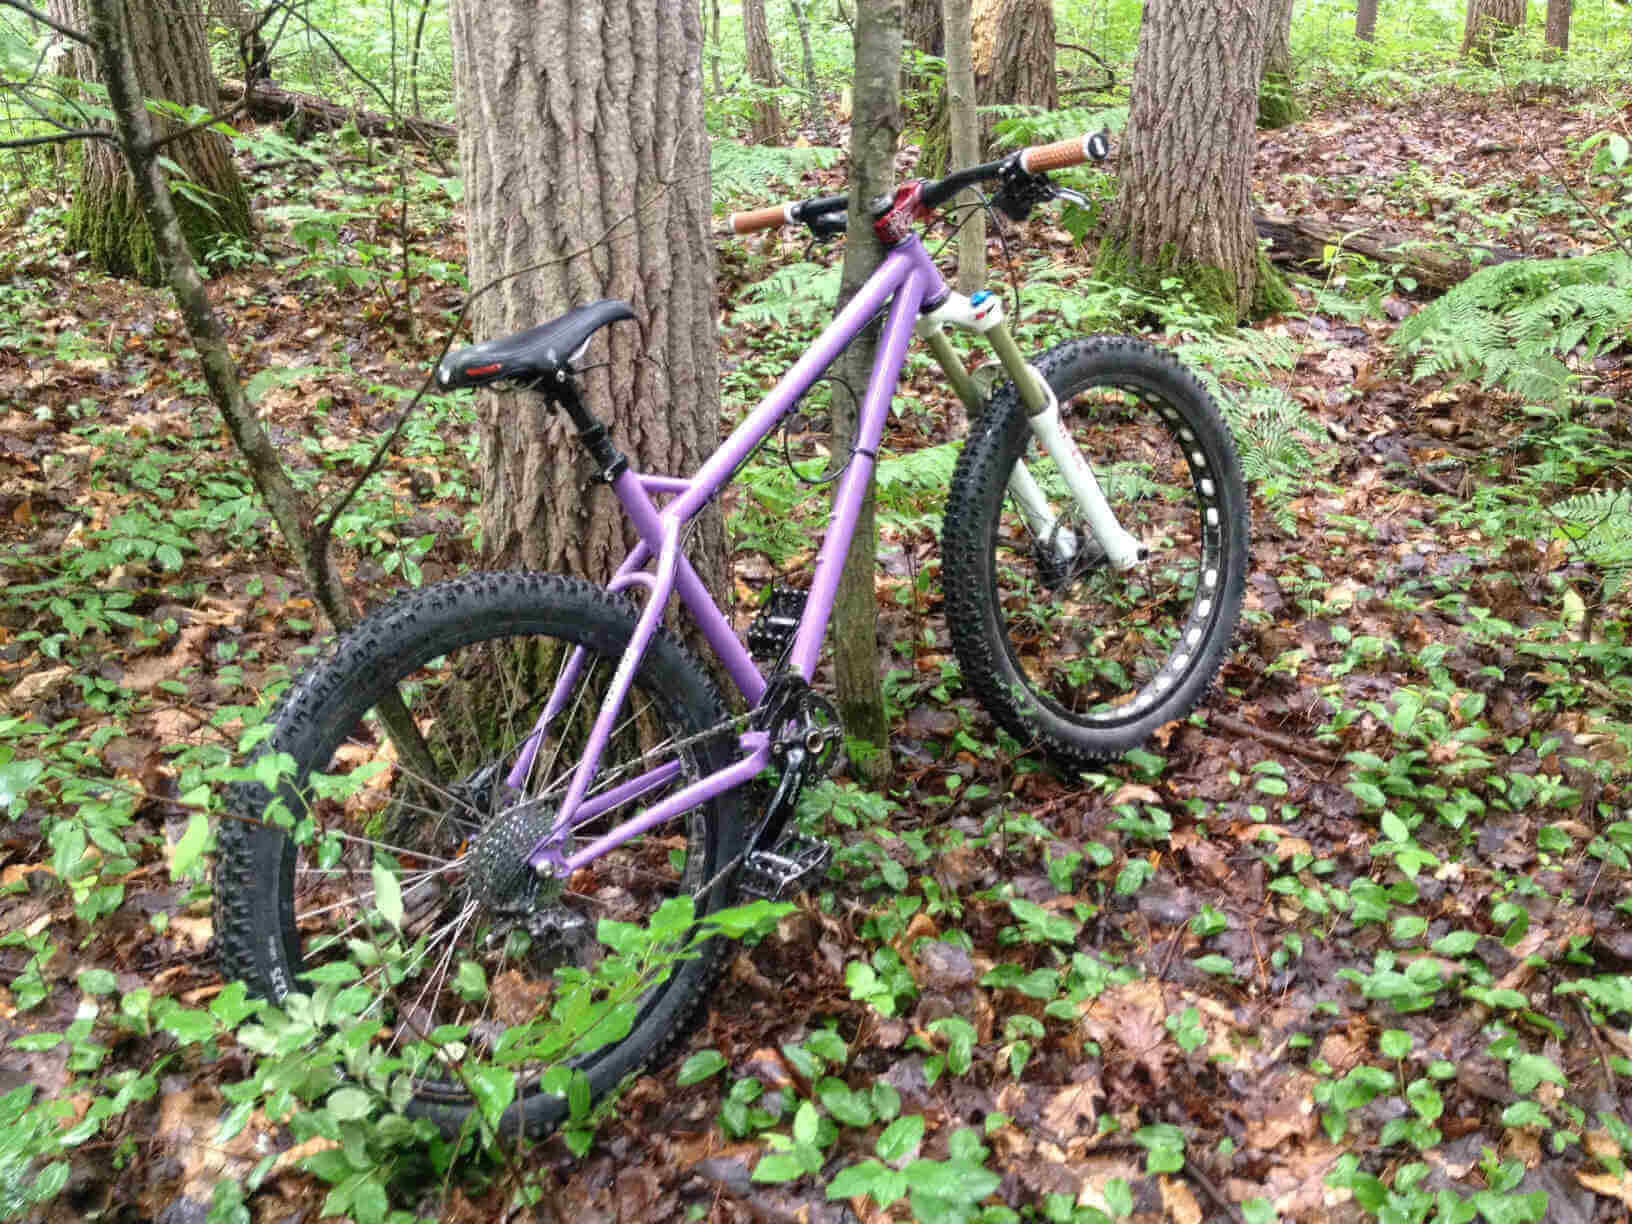 Right side view of a purple Surly Instigator bike, leaning against a tree in a wet forest